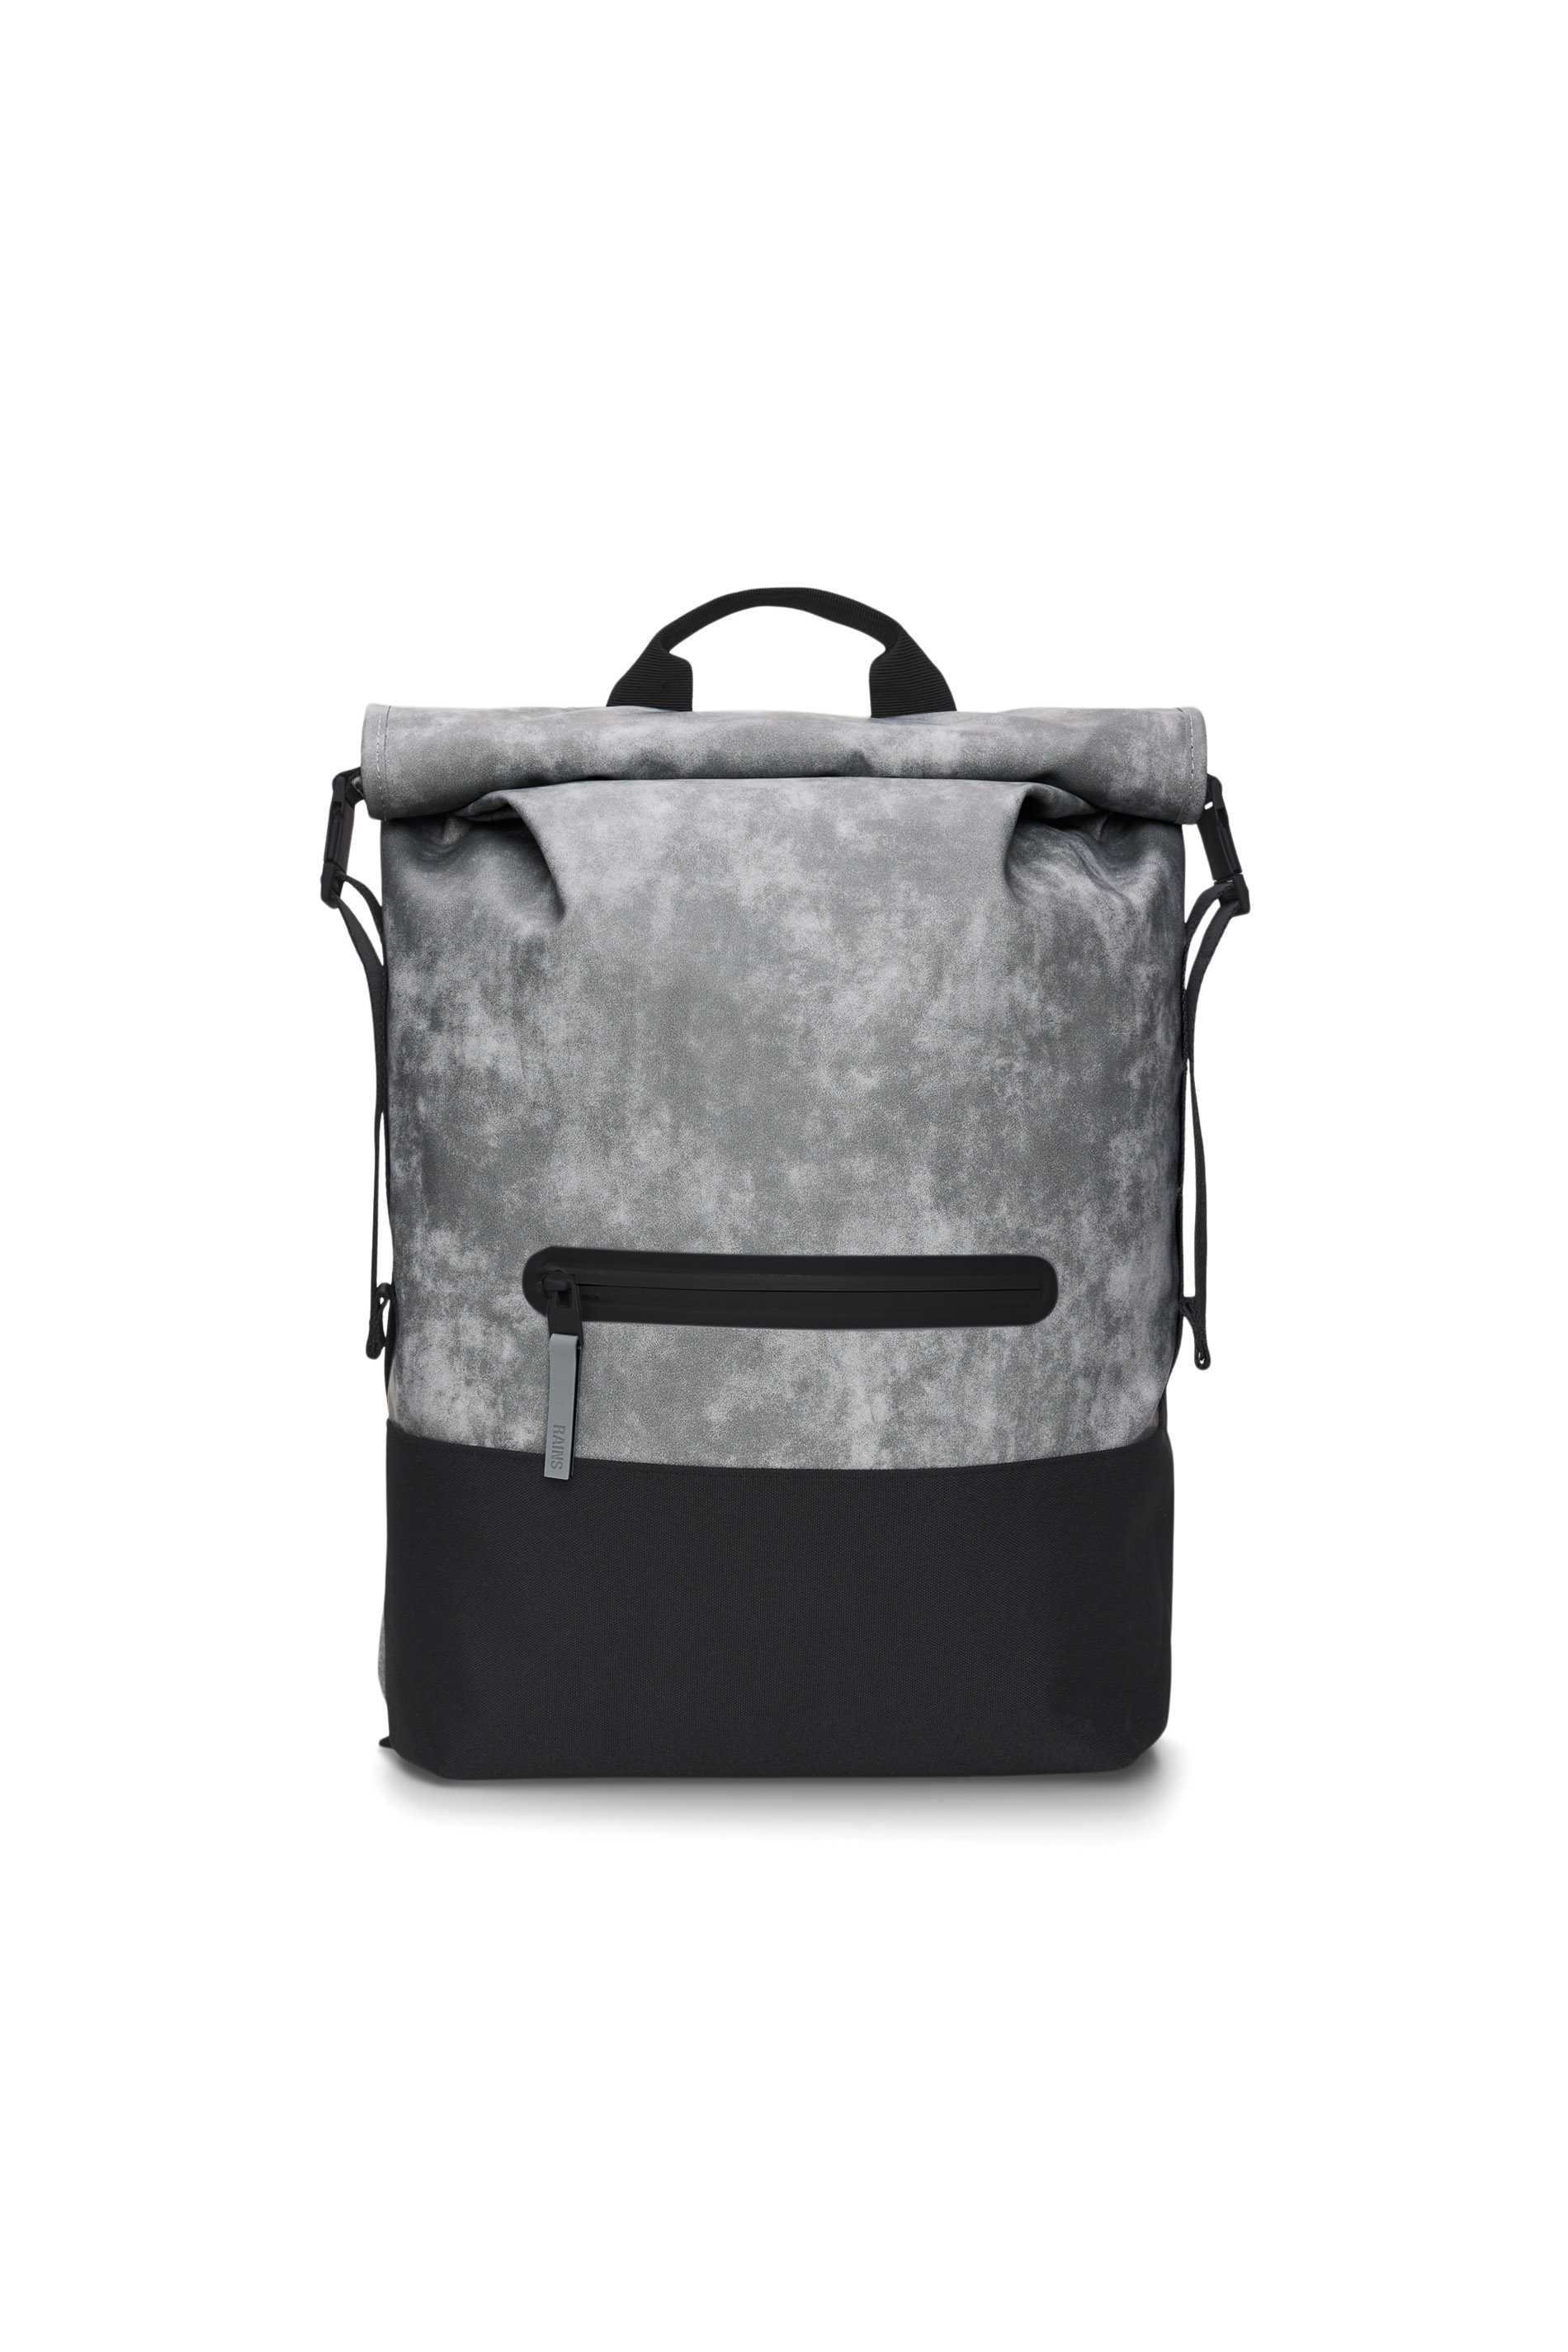 Trail Rolltop Backpack W3 - Distressed Grey